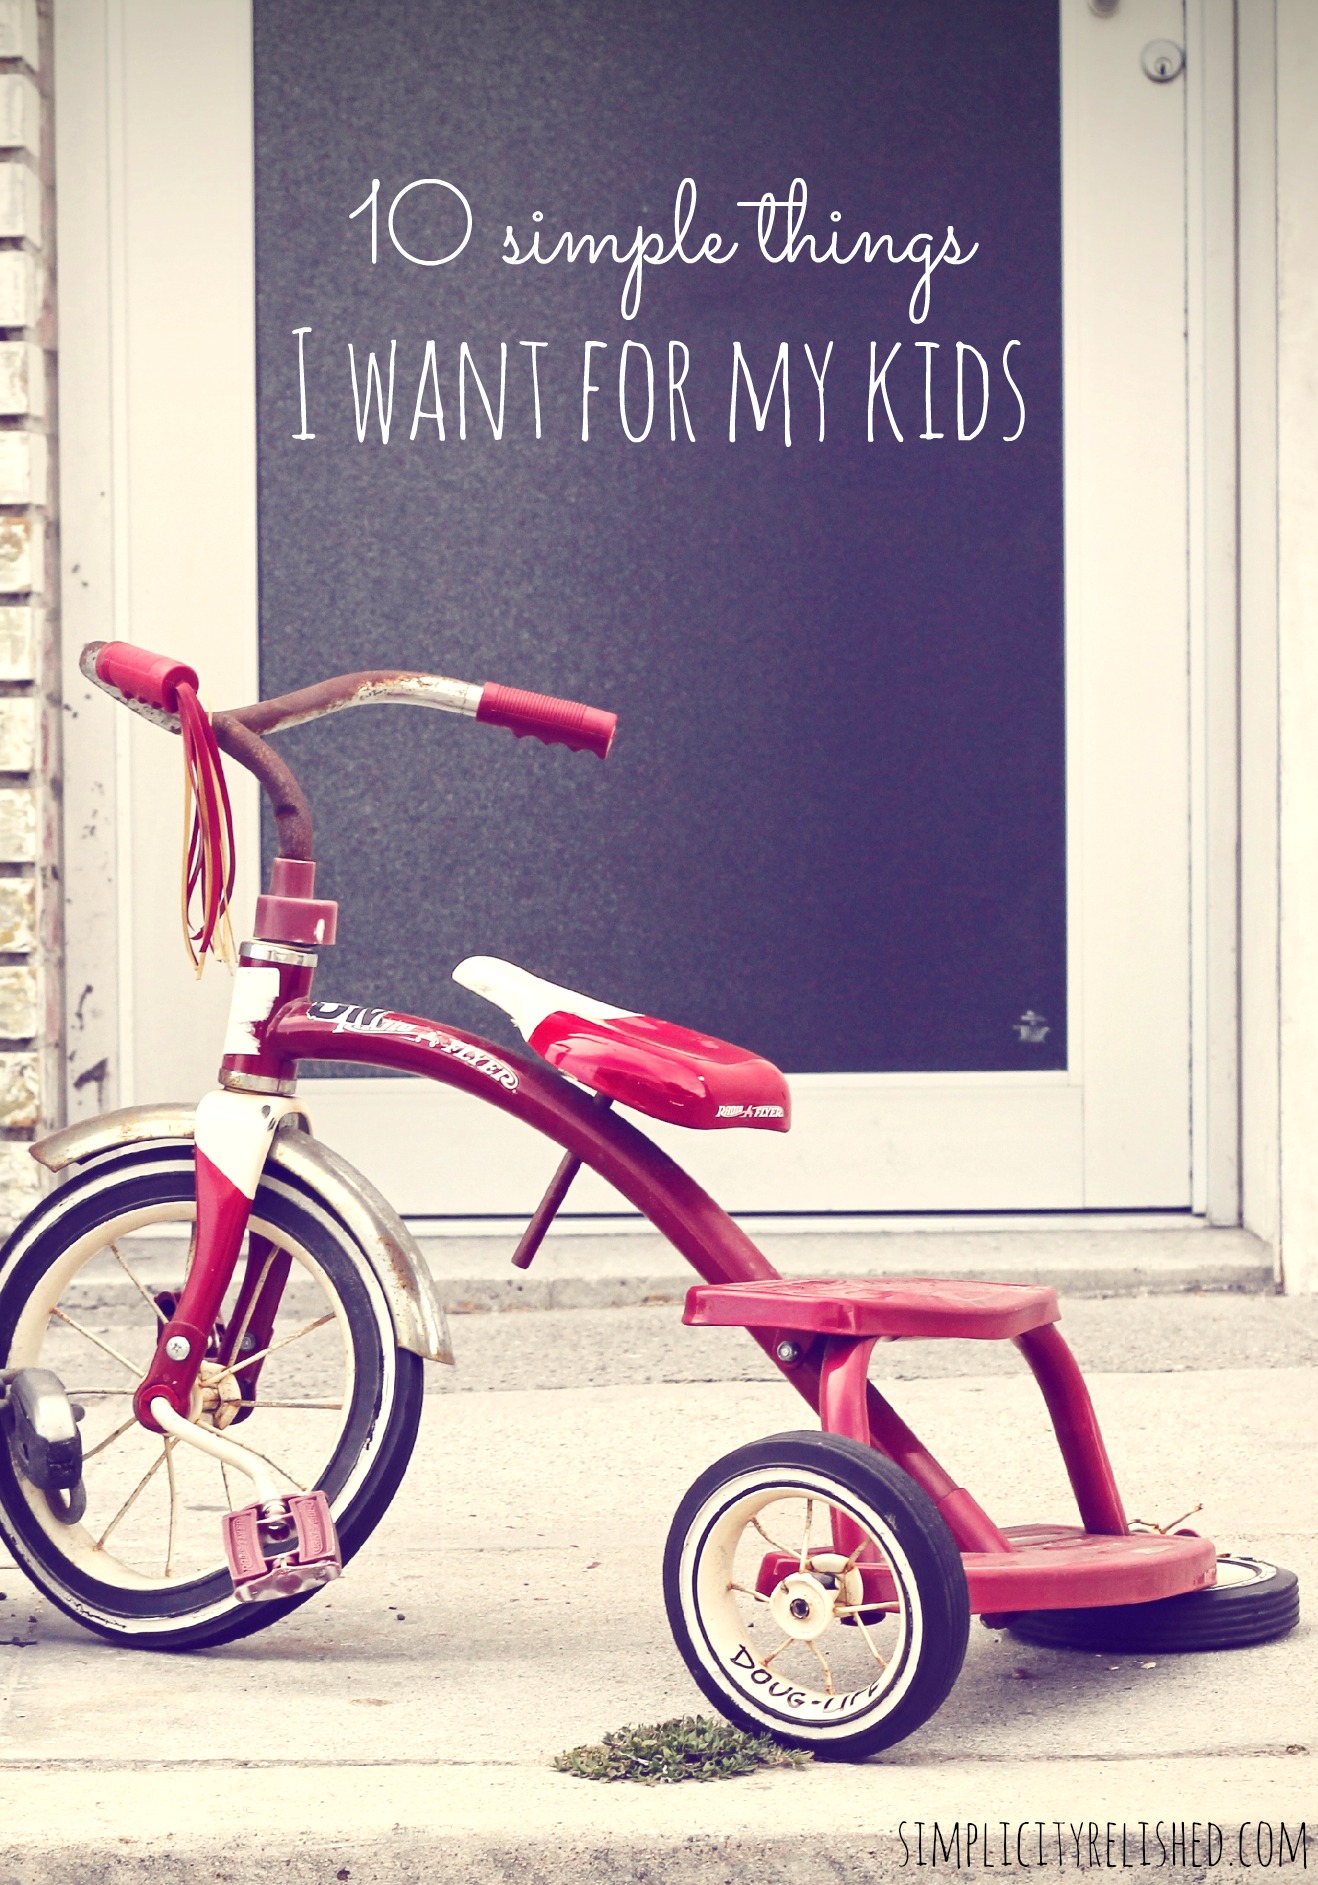 10 simple things I want for my kids- elements of childhood that should not be forgotten